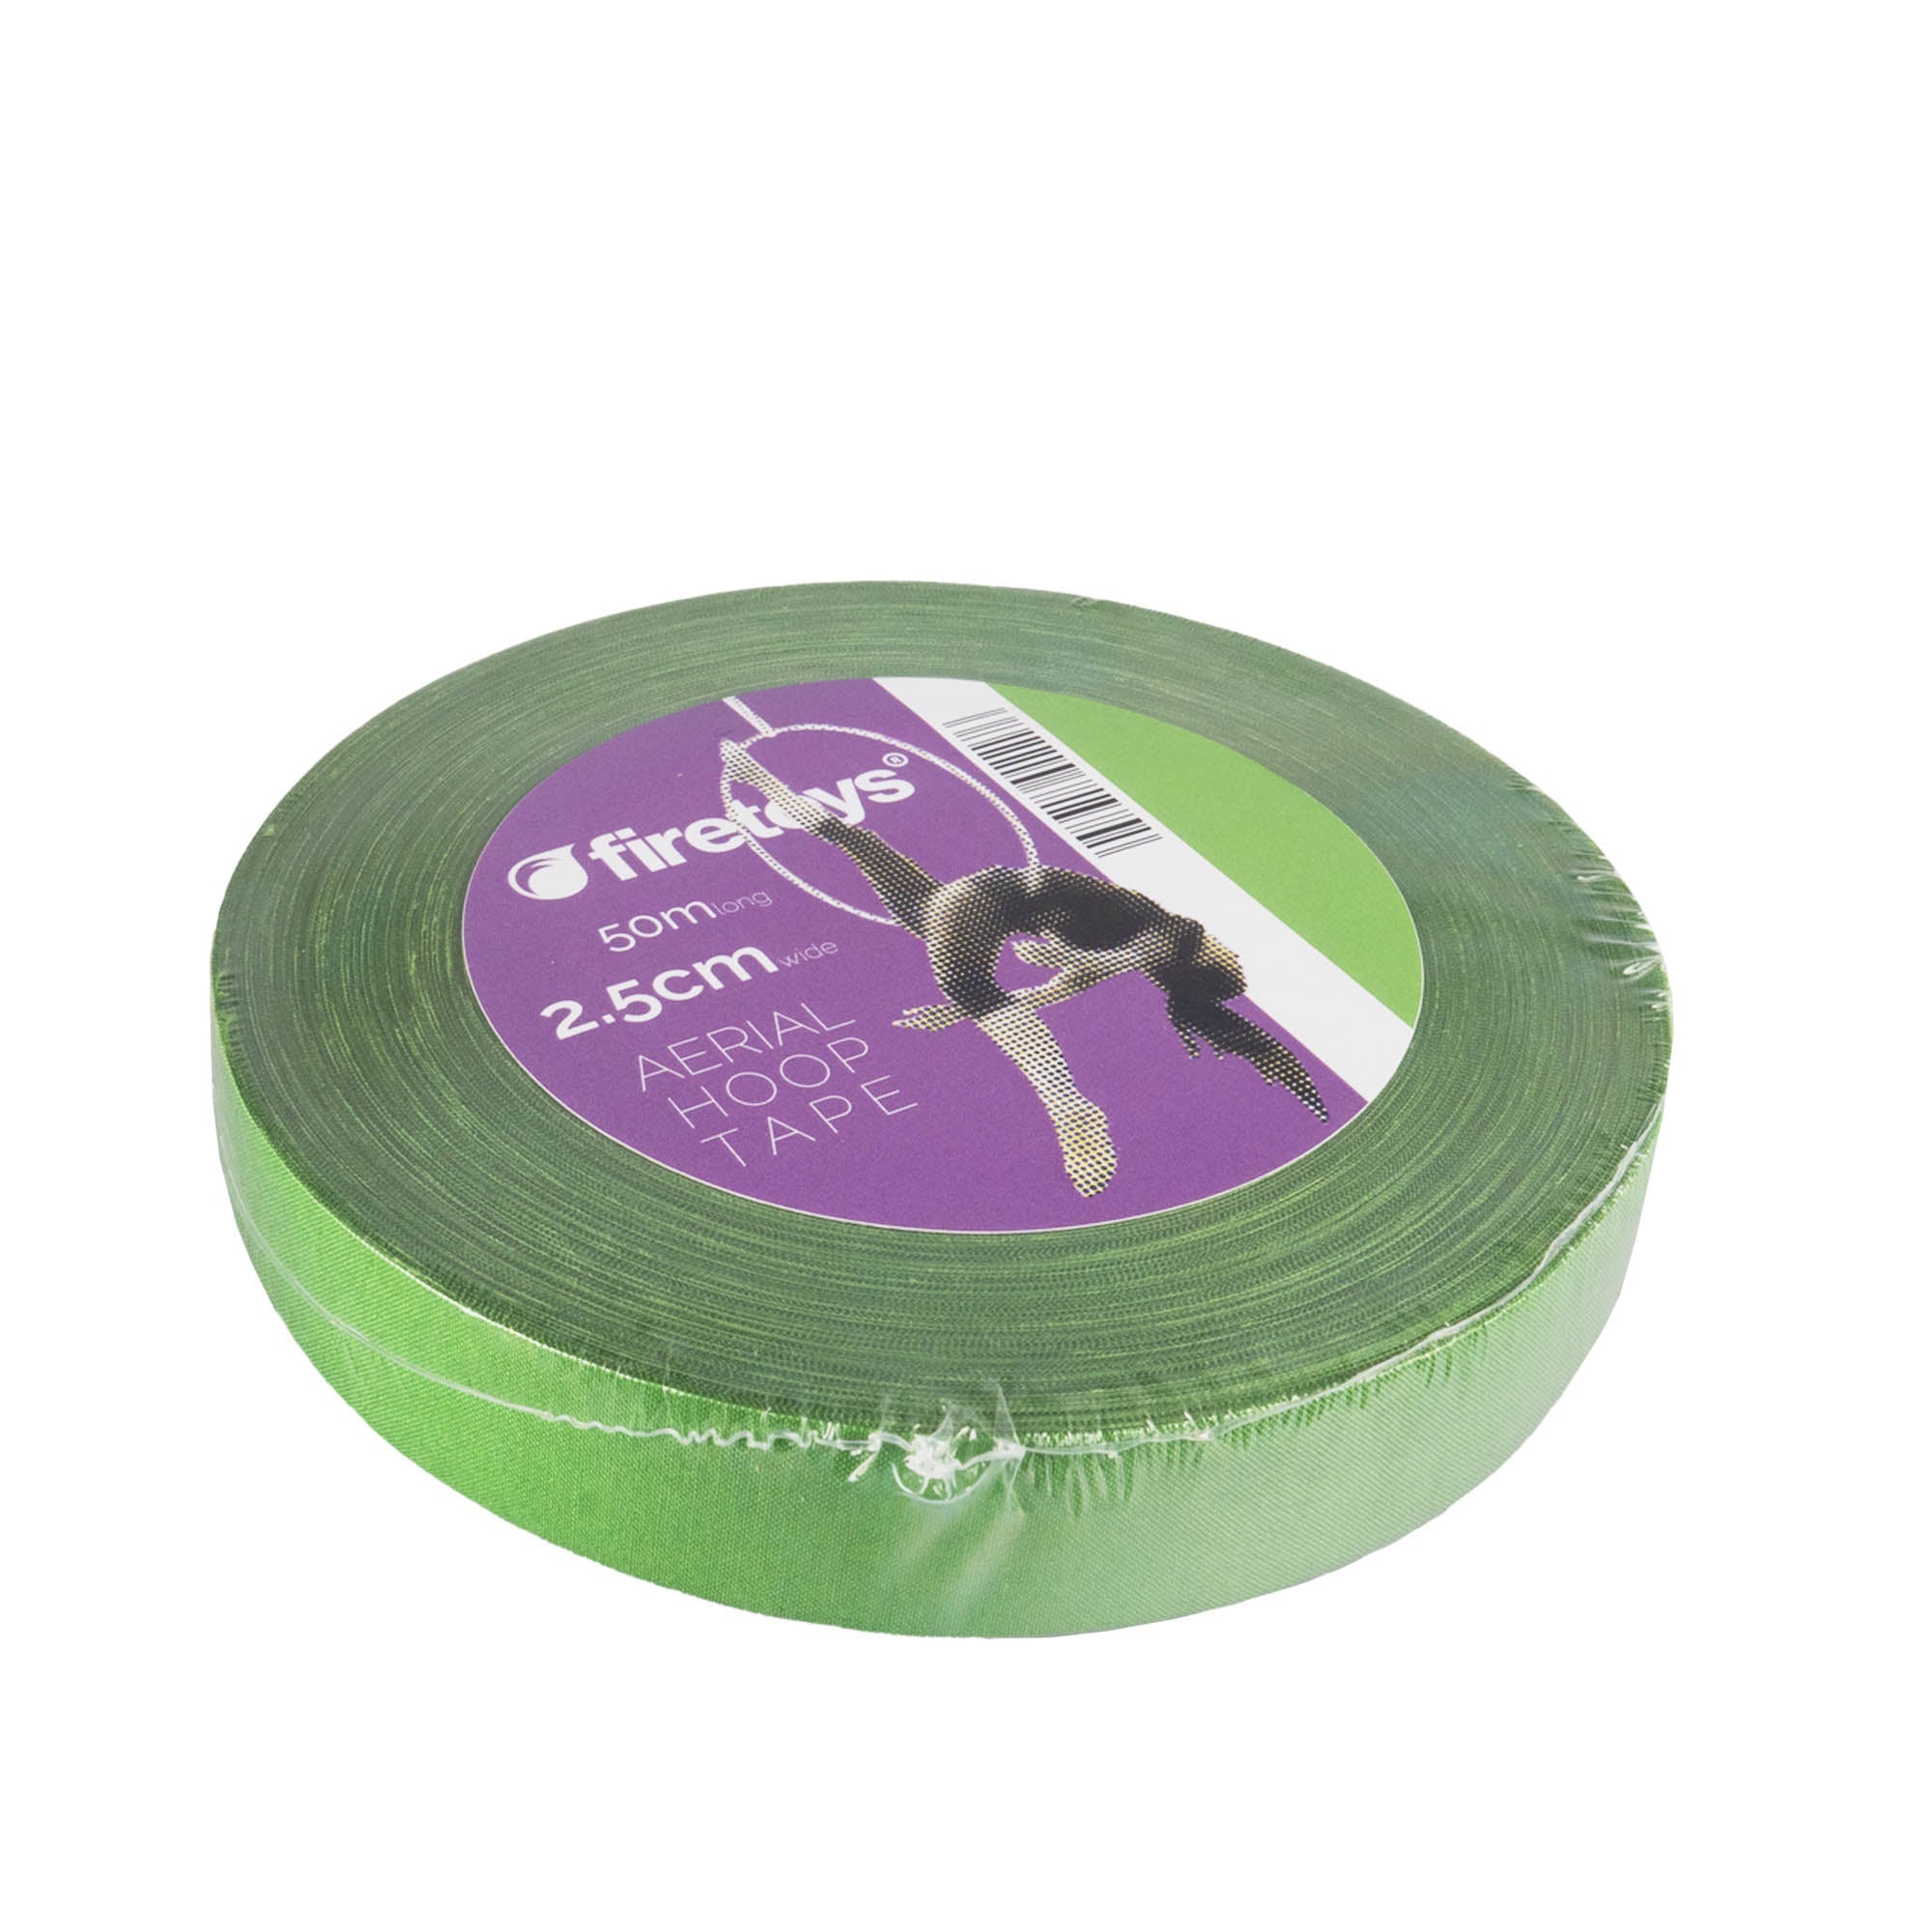 packaged roll of green 2.5cm wide tape